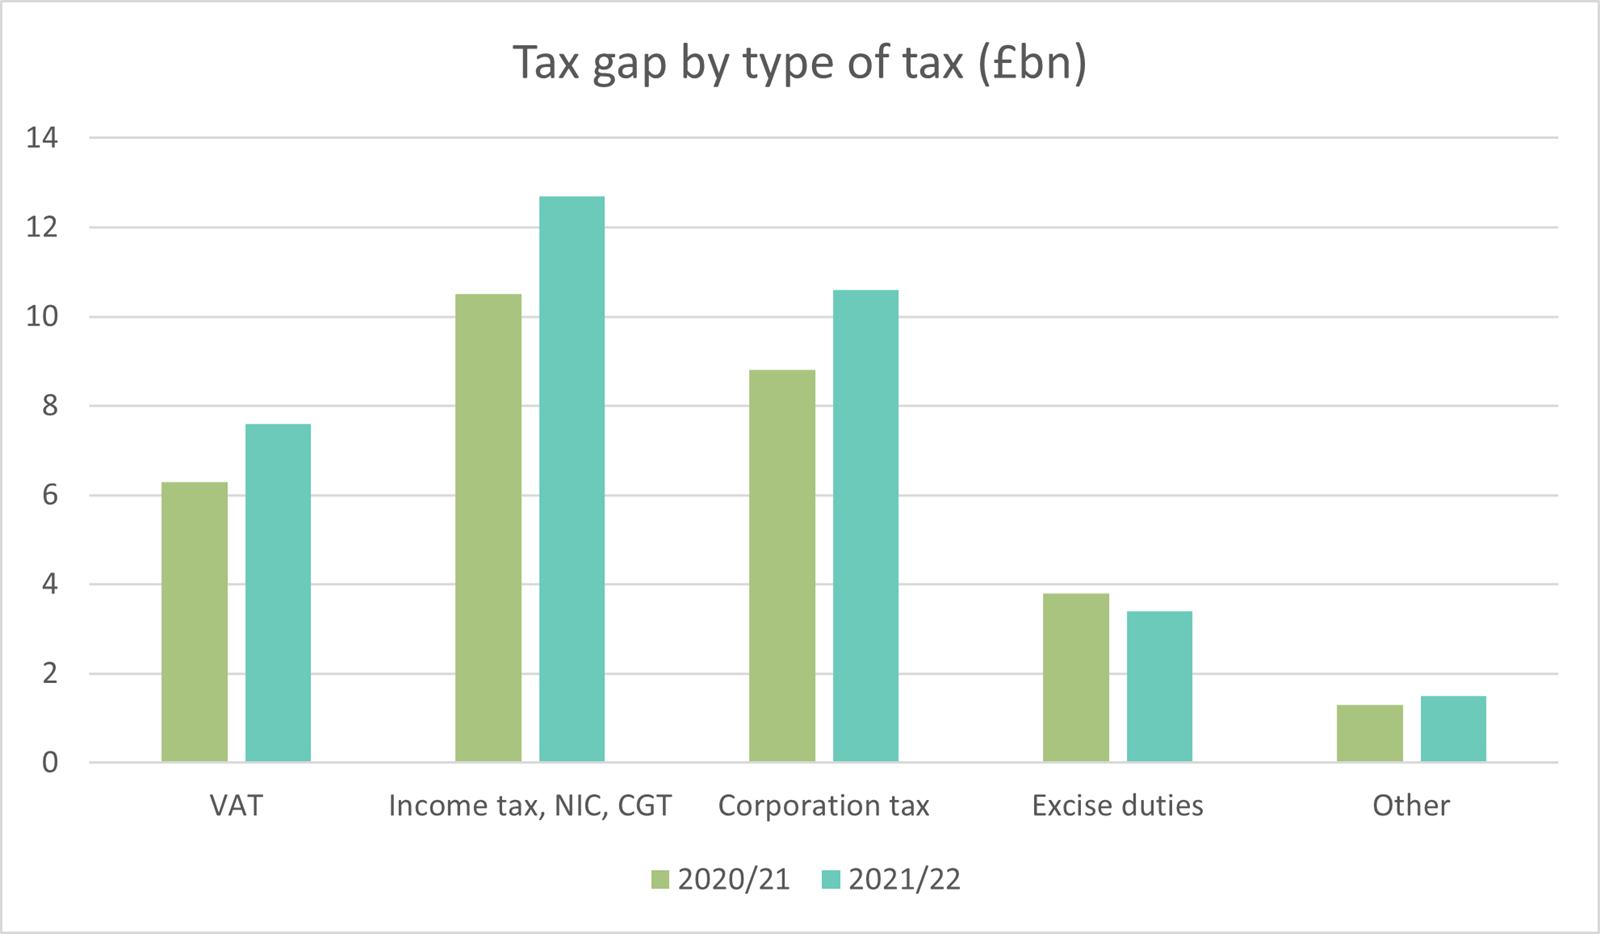 Table showing the tax gap comparison for 2020/21 to 2021/2022 by type of tax according to HMRC data.